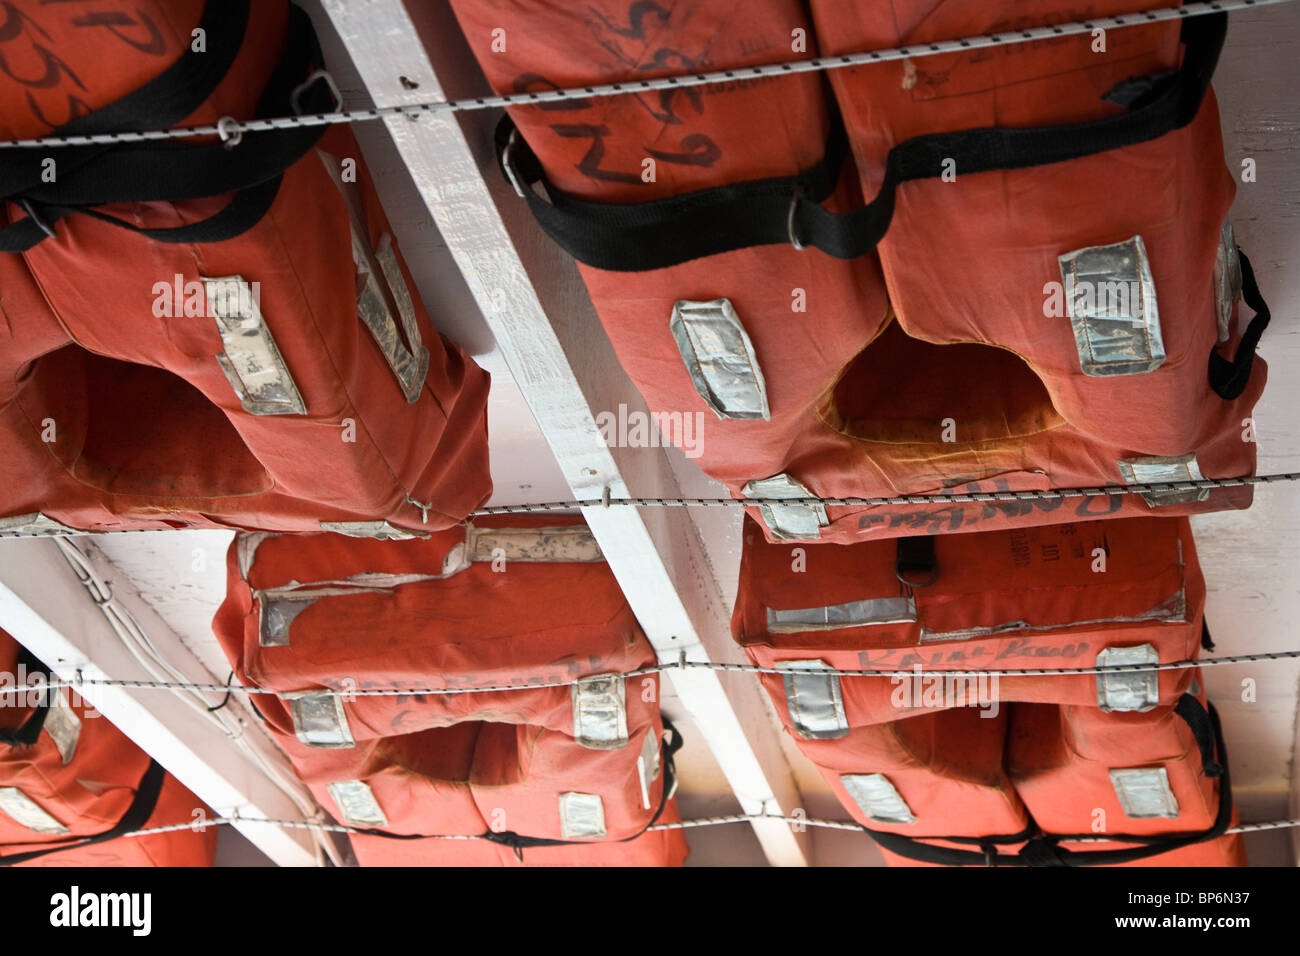 Detail of life vests stowed on a ship Stock Photo